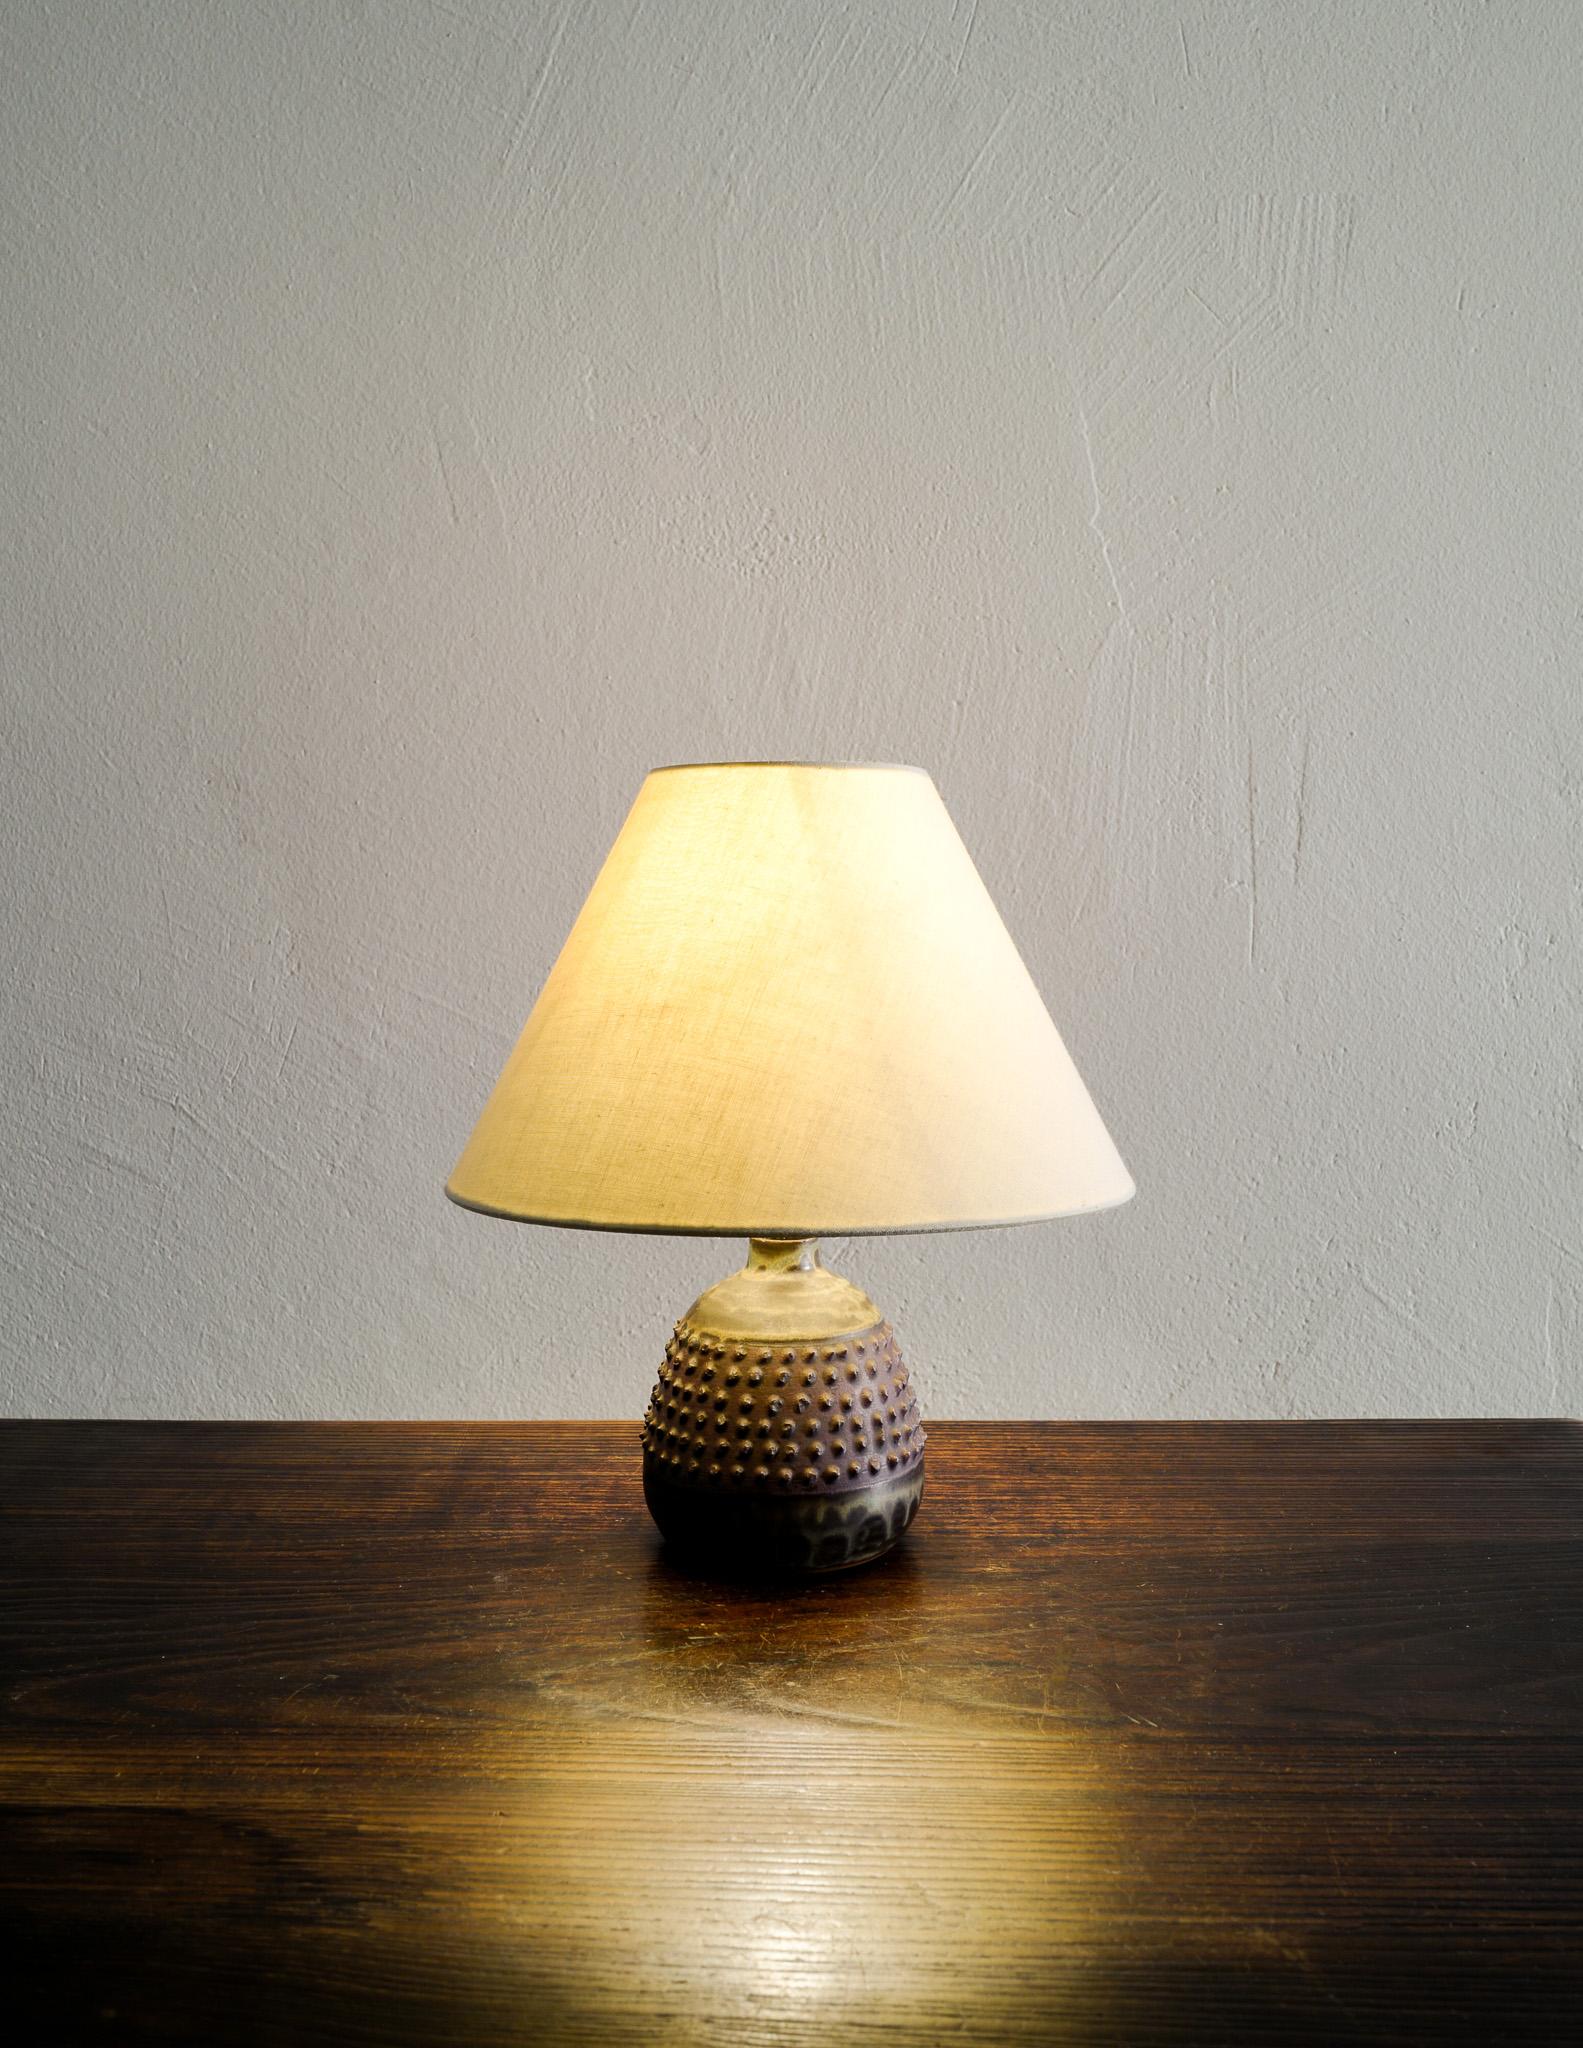 Scandinavian Modern Mid Century Ceramic / Stoneware Table Lamp by Rolf Palm for Höganäs, 1940s  For Sale